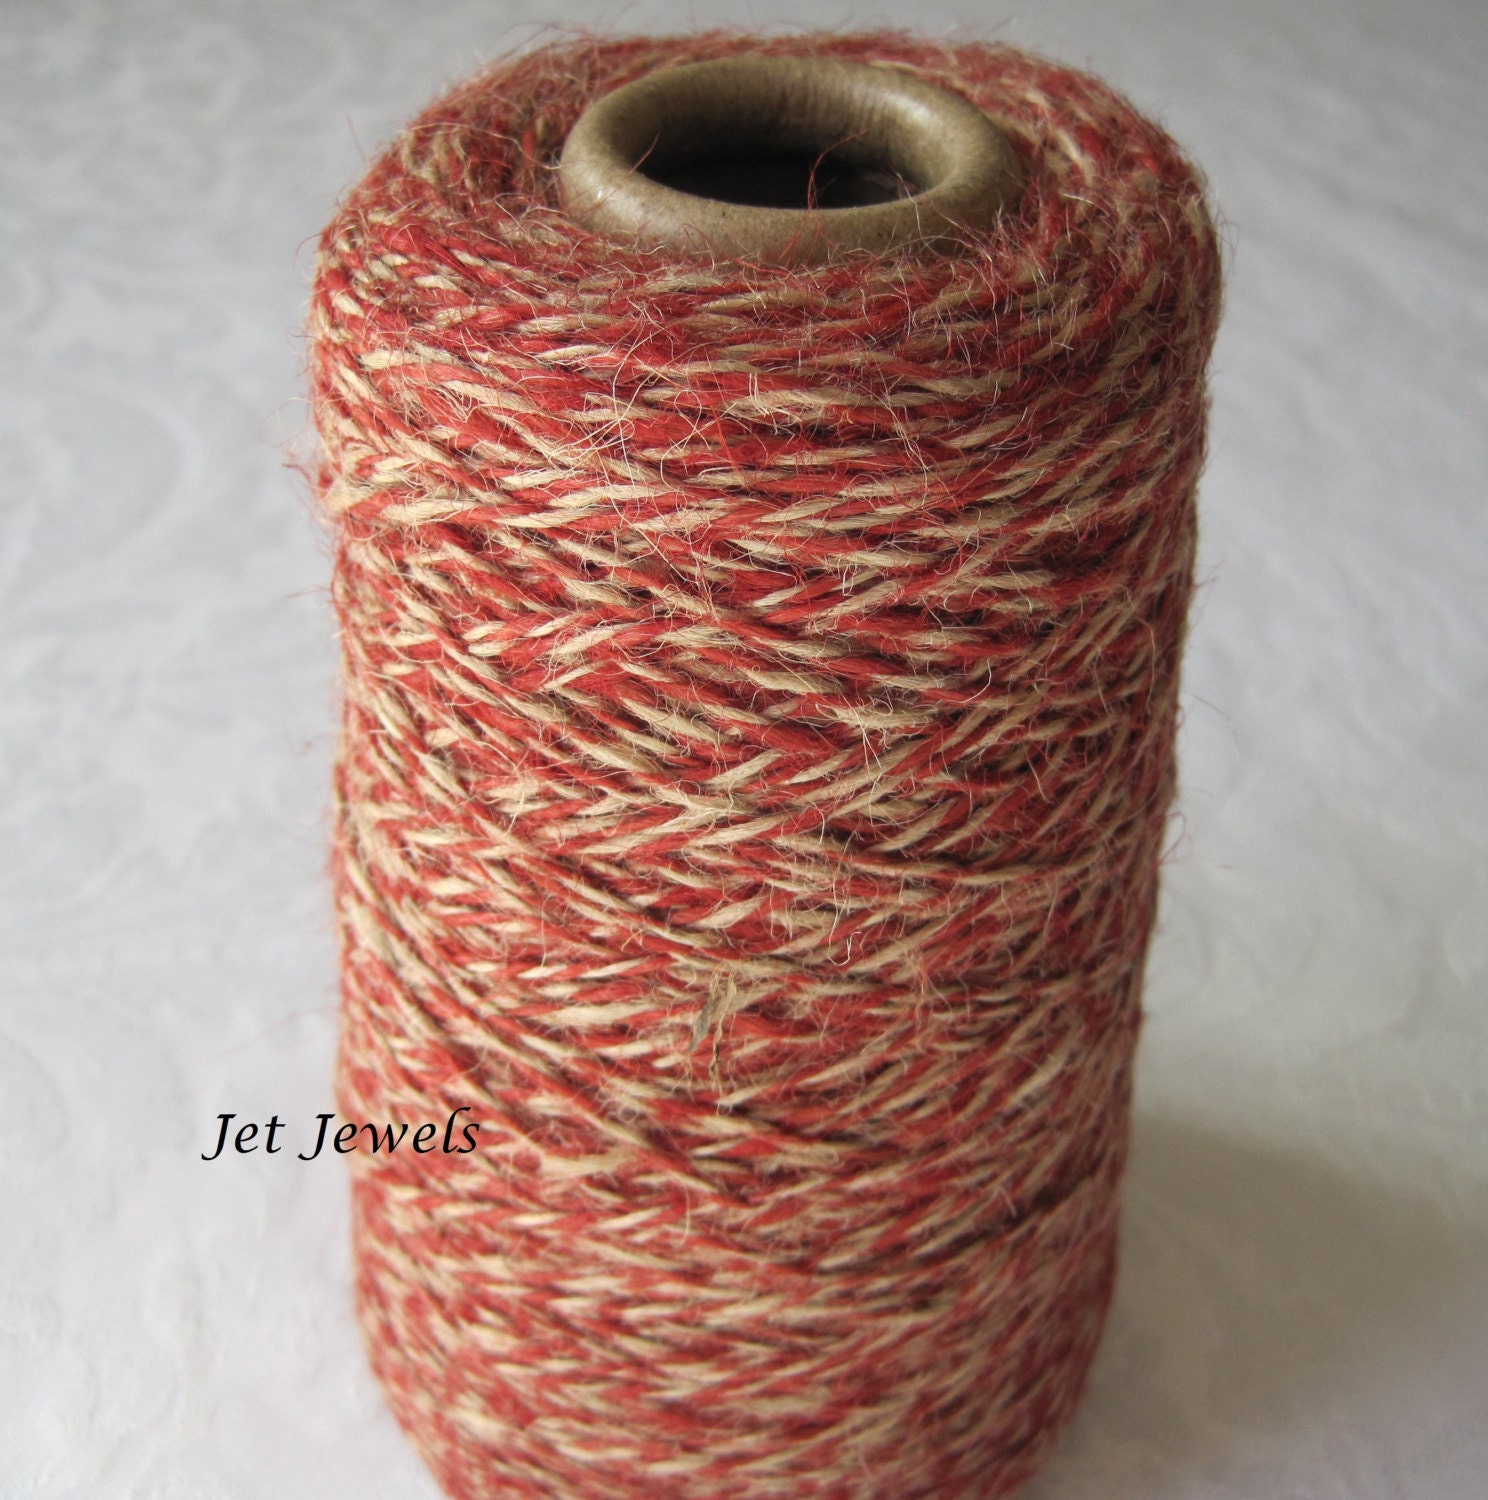 Jute Twine, Red Twine, Natural Jute, Natural Twine, Colored String, Rustic  Gift Wrap, Gift Wrapping, Box Twine, 25 YARDS on Wood Spool -  Israel